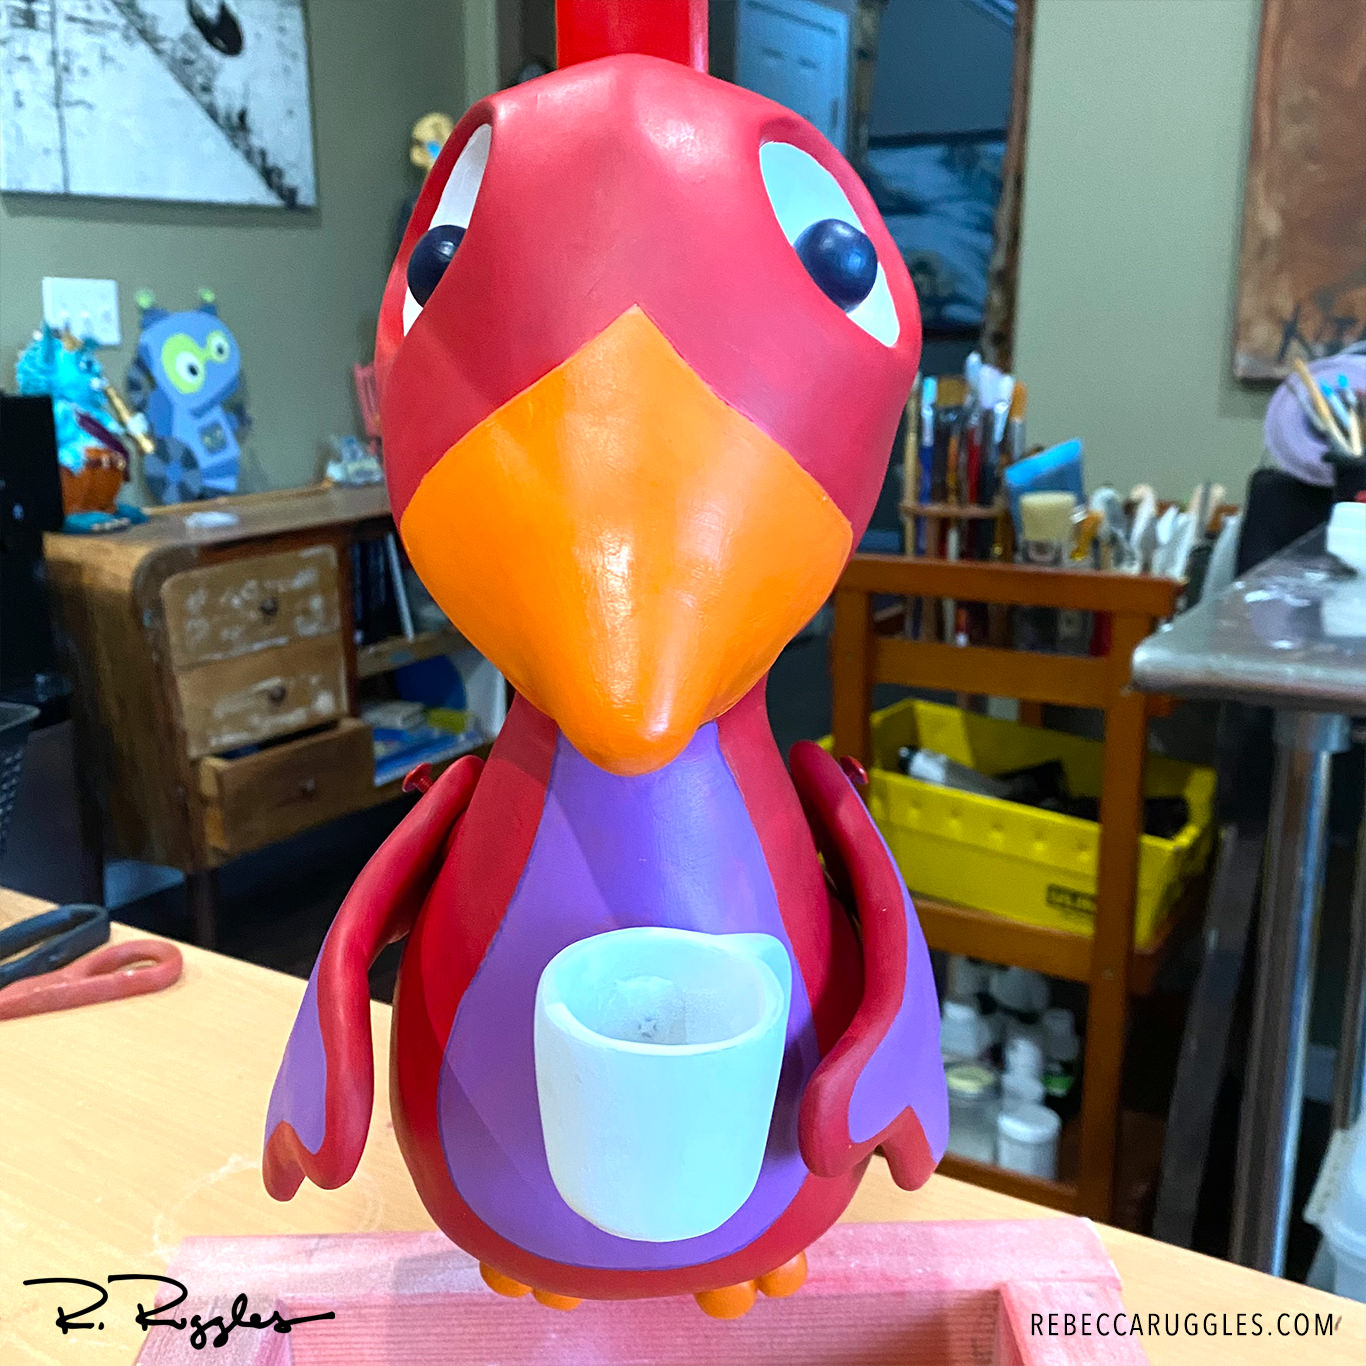 Red robin bird sculpture during painting phase.